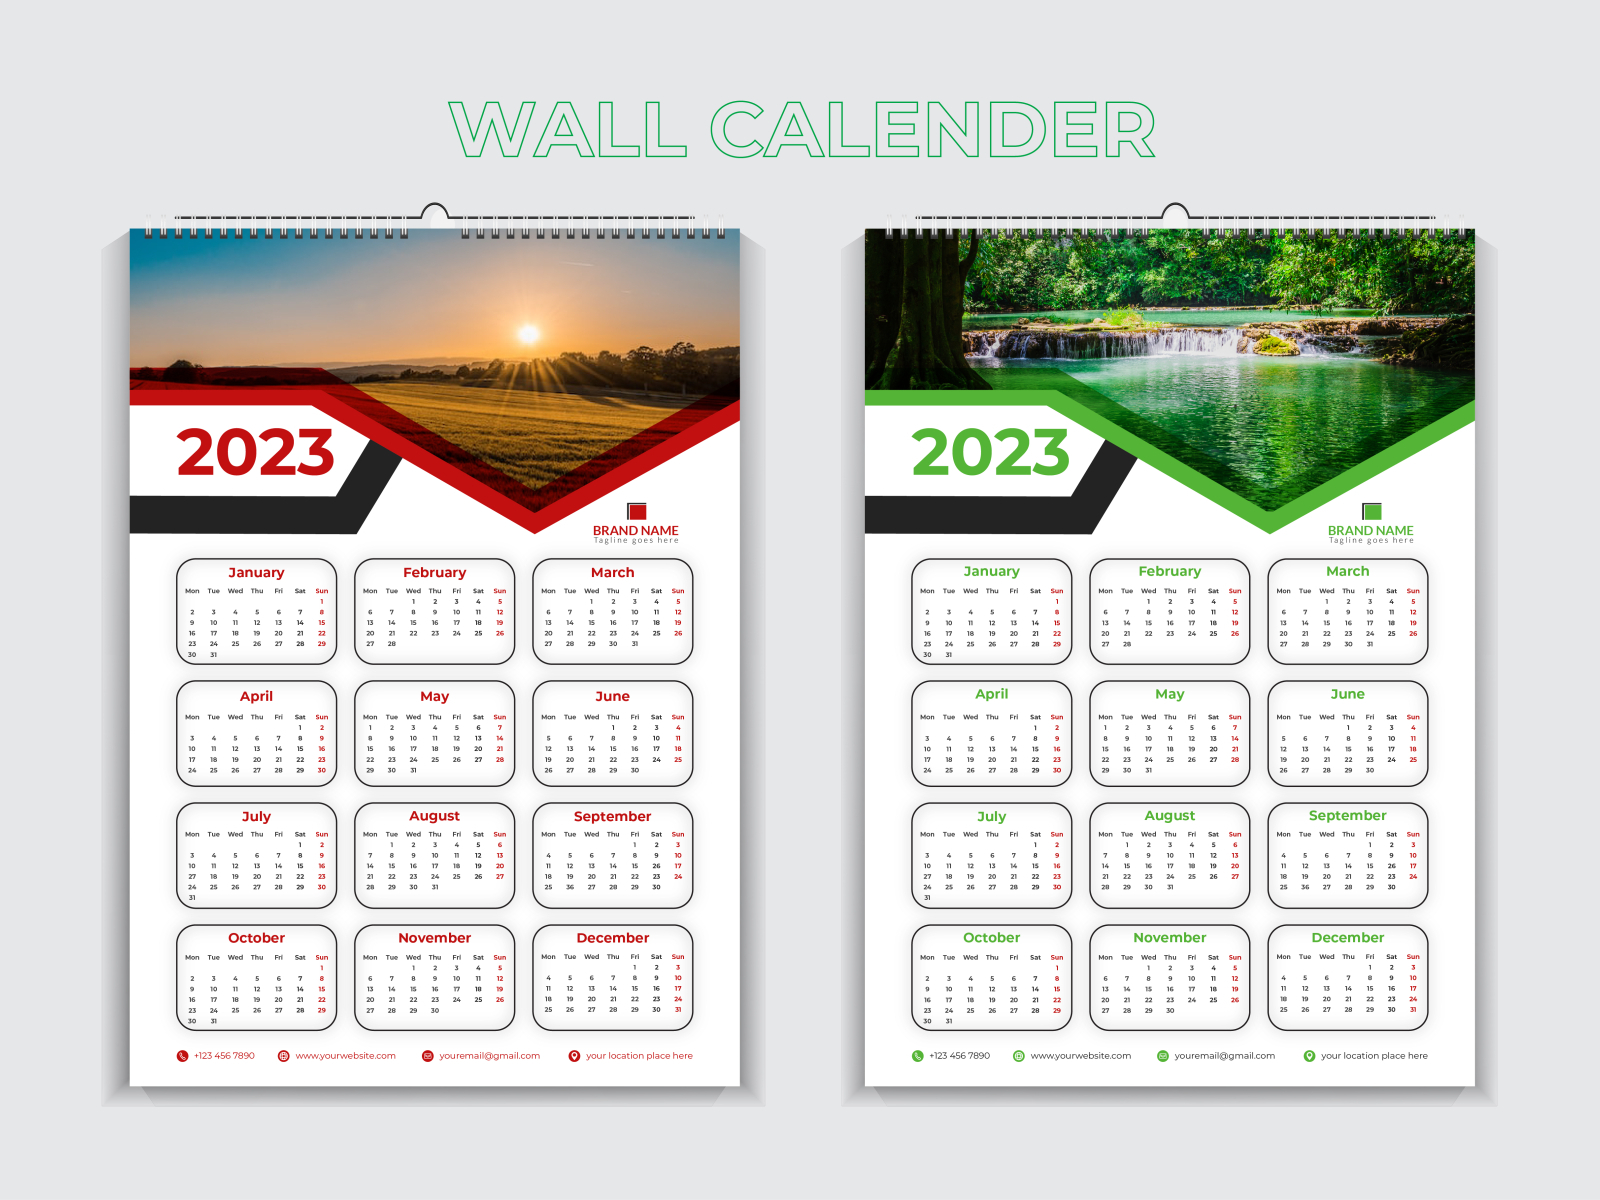 2023 one page Corporate wall calendar template design by Hasan Ahmad